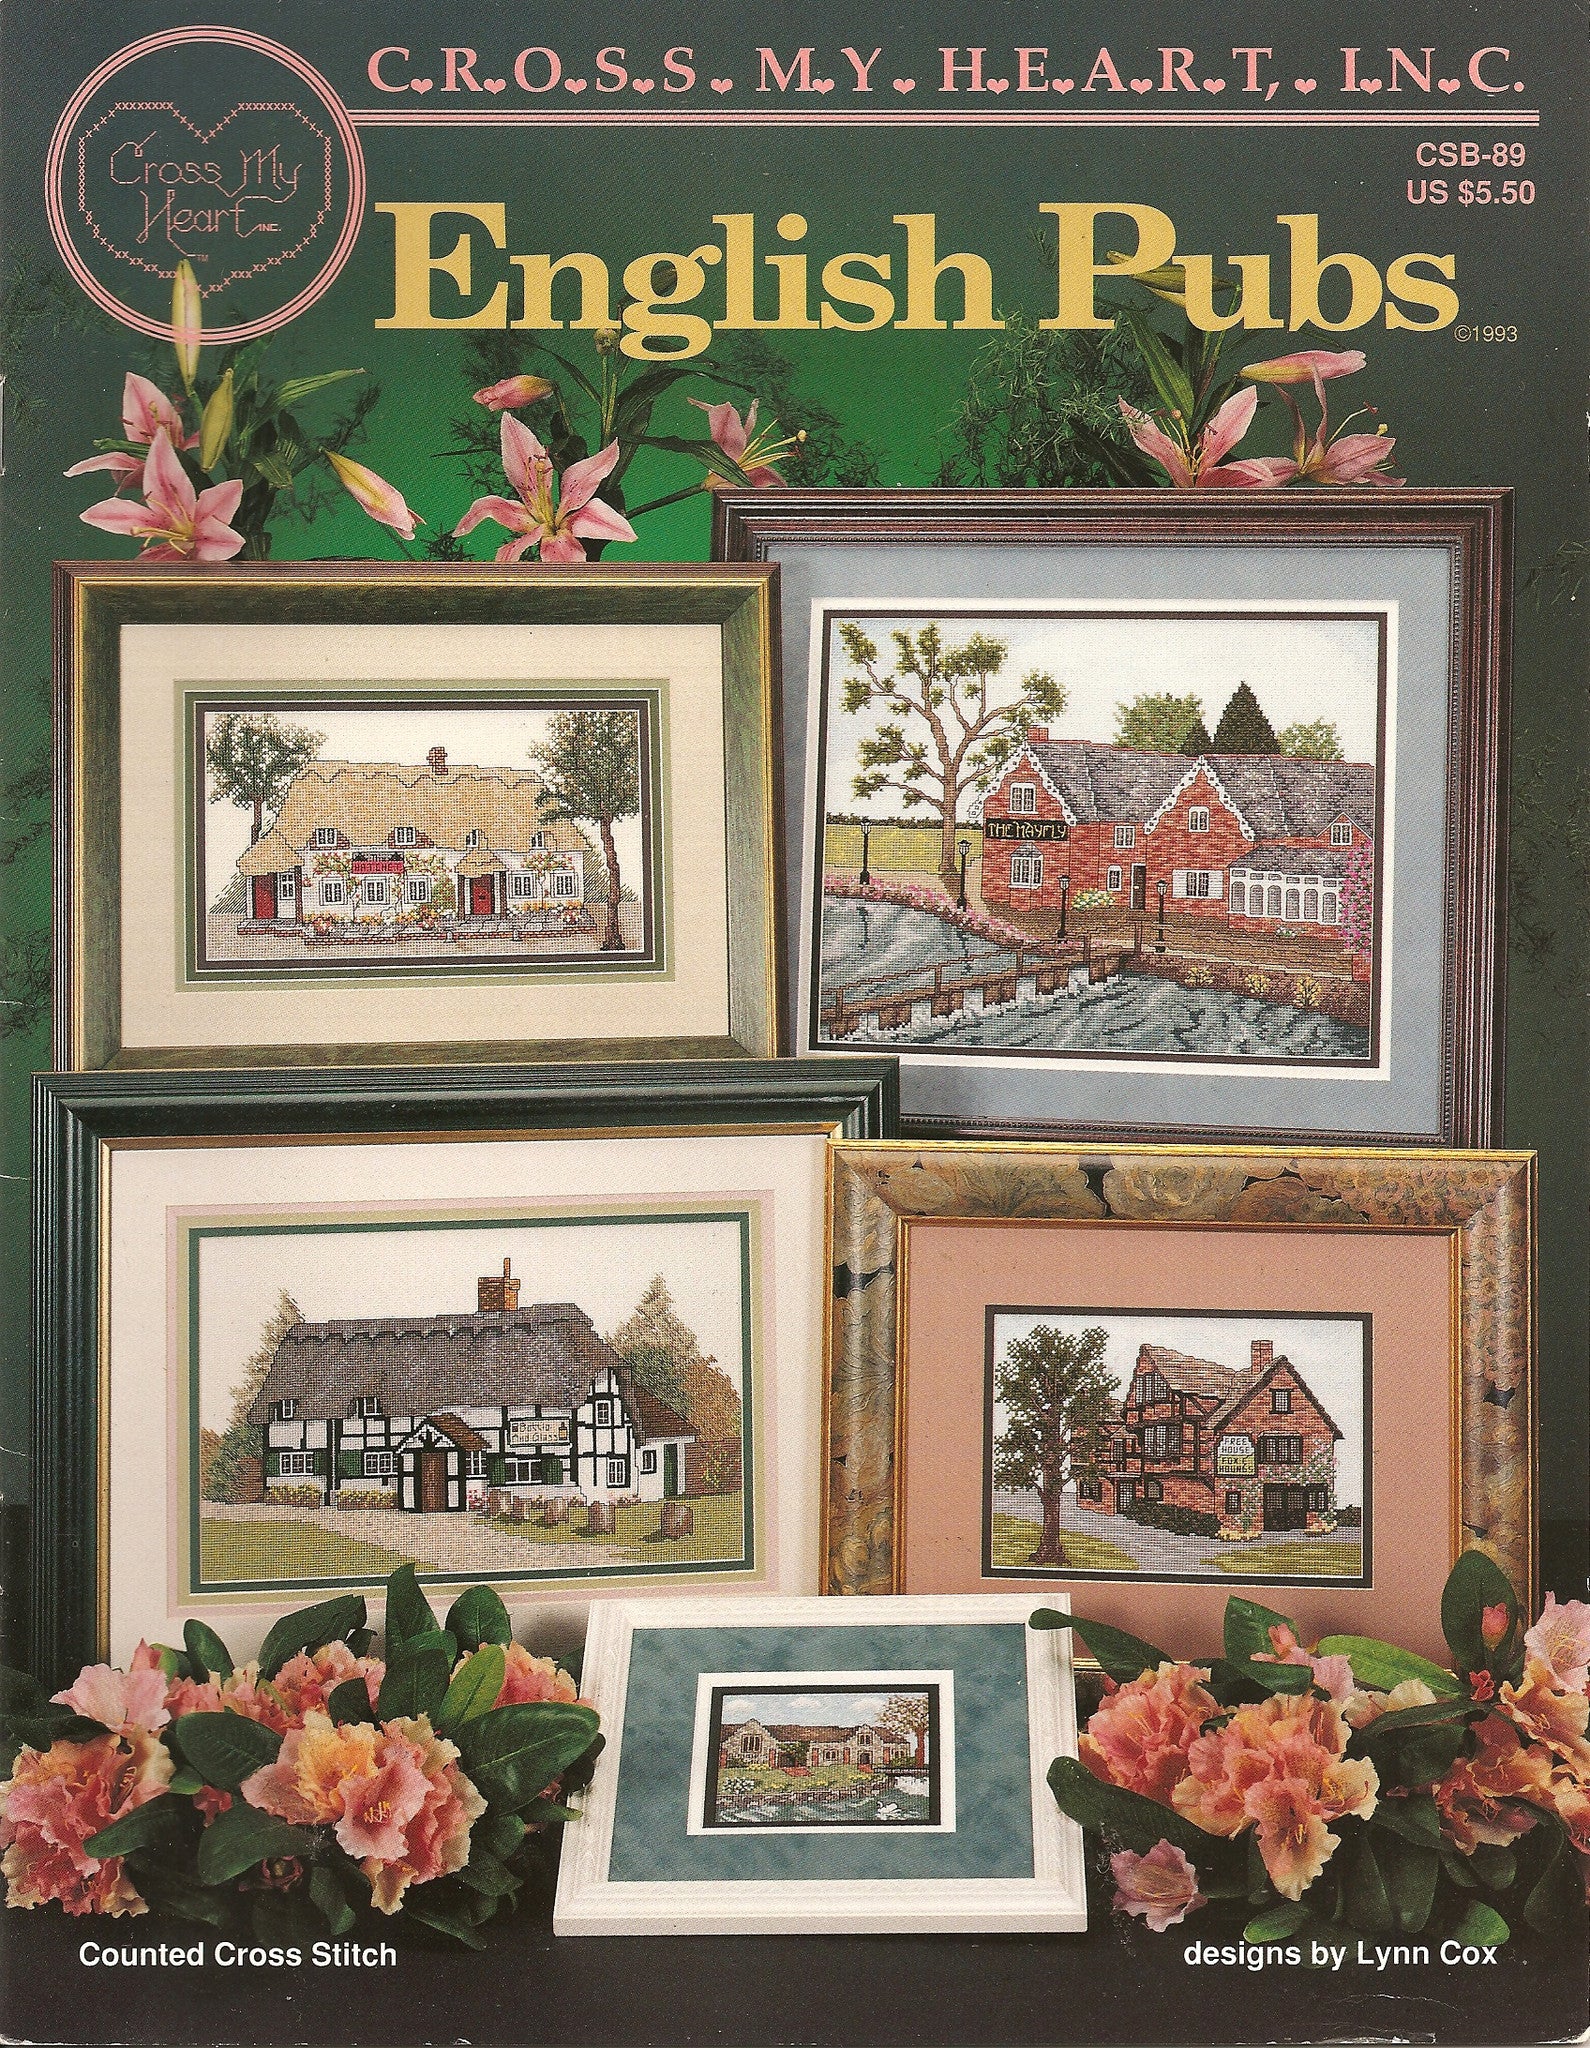 Cross My Heart English Pubs cross stitch patterns booklet